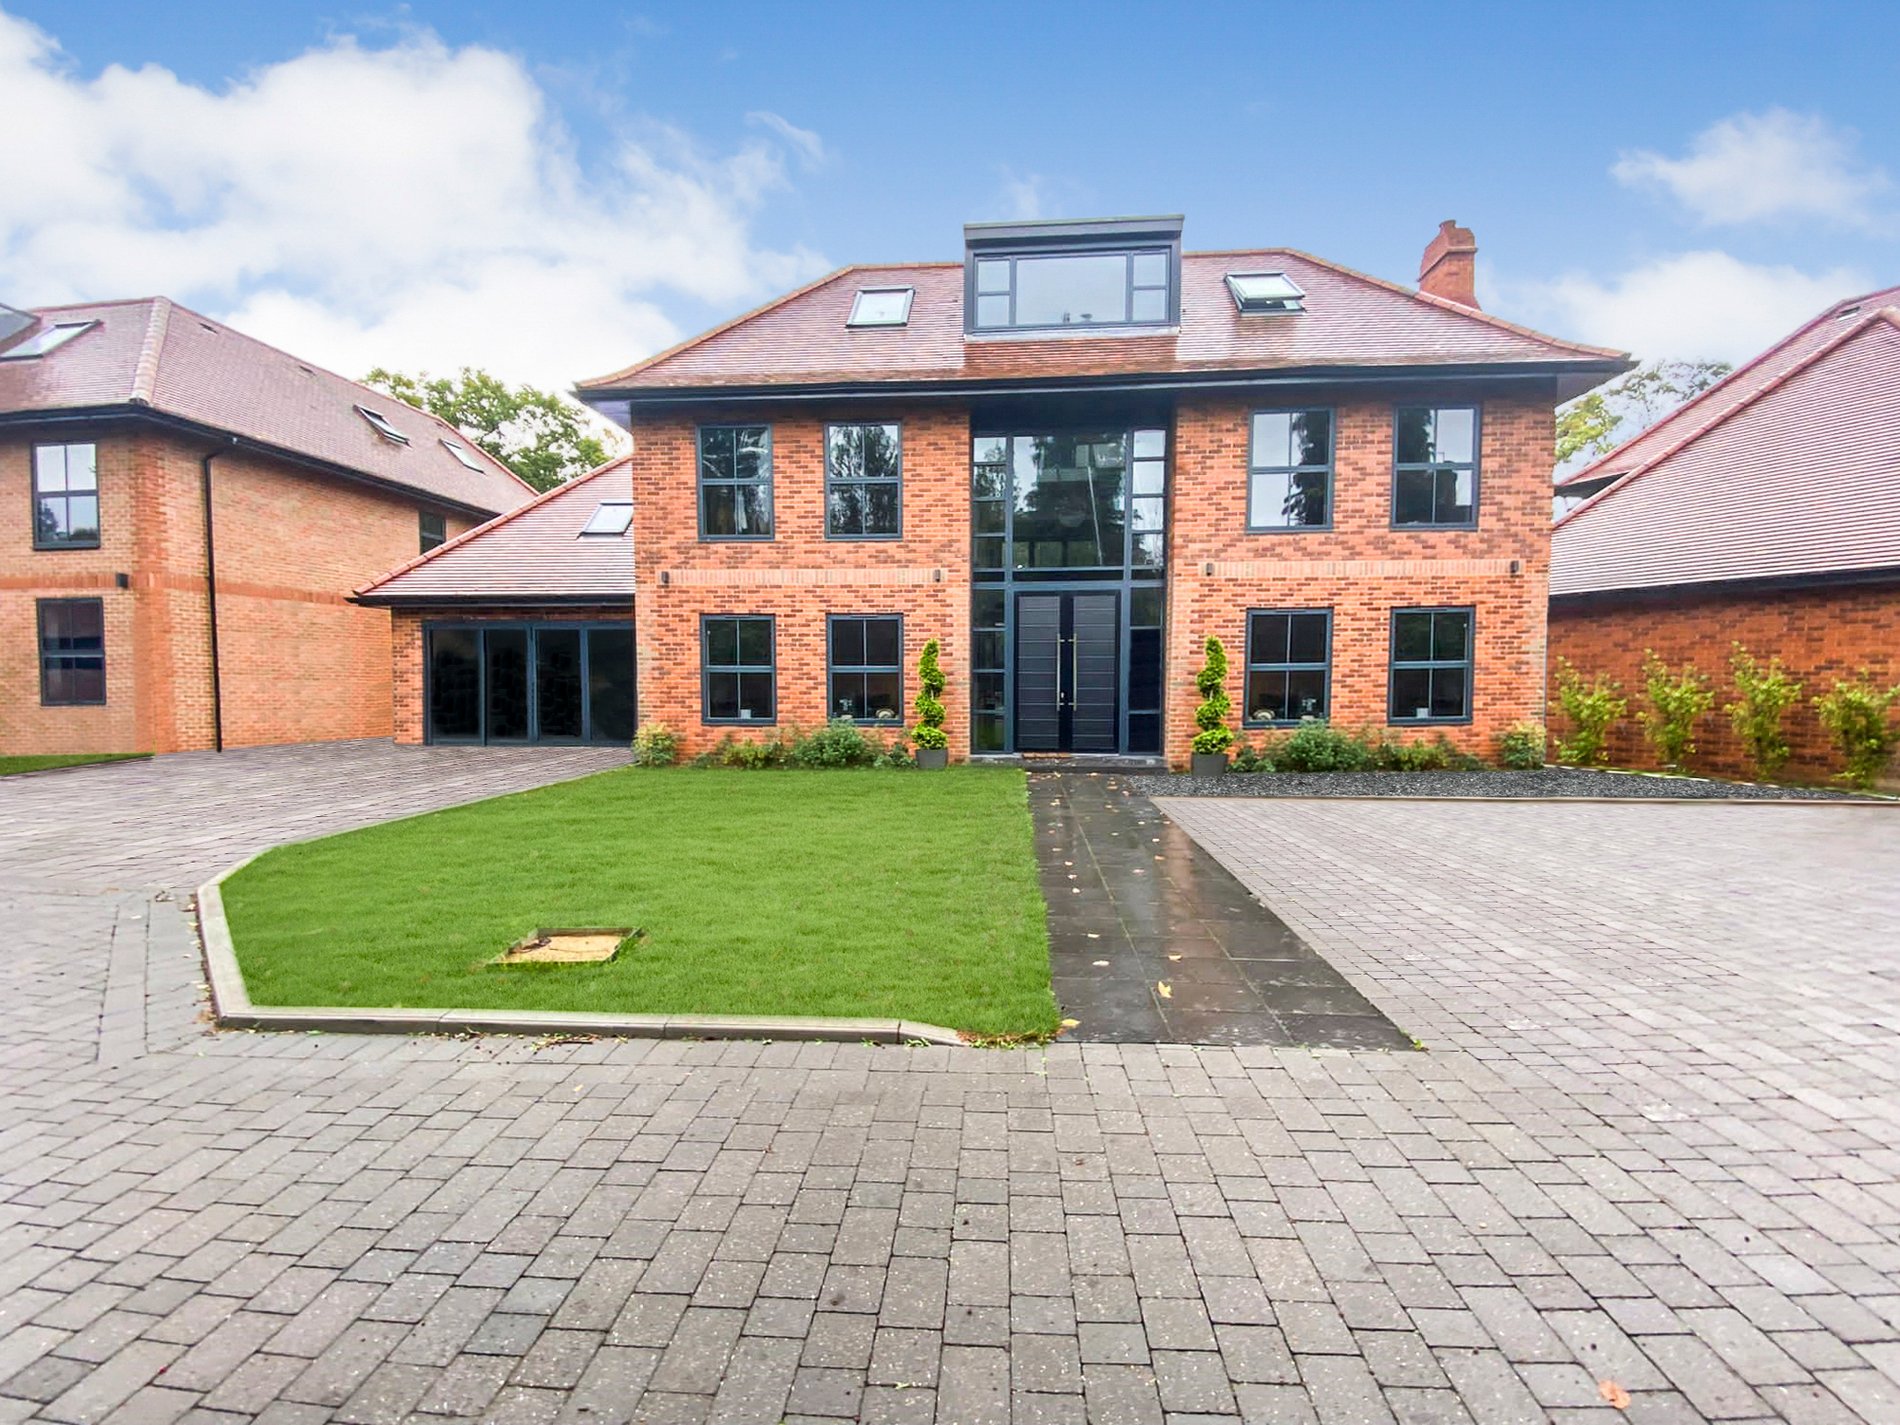 6 bed detached house to rent in Pinewood Close, Iver - Property Image 1